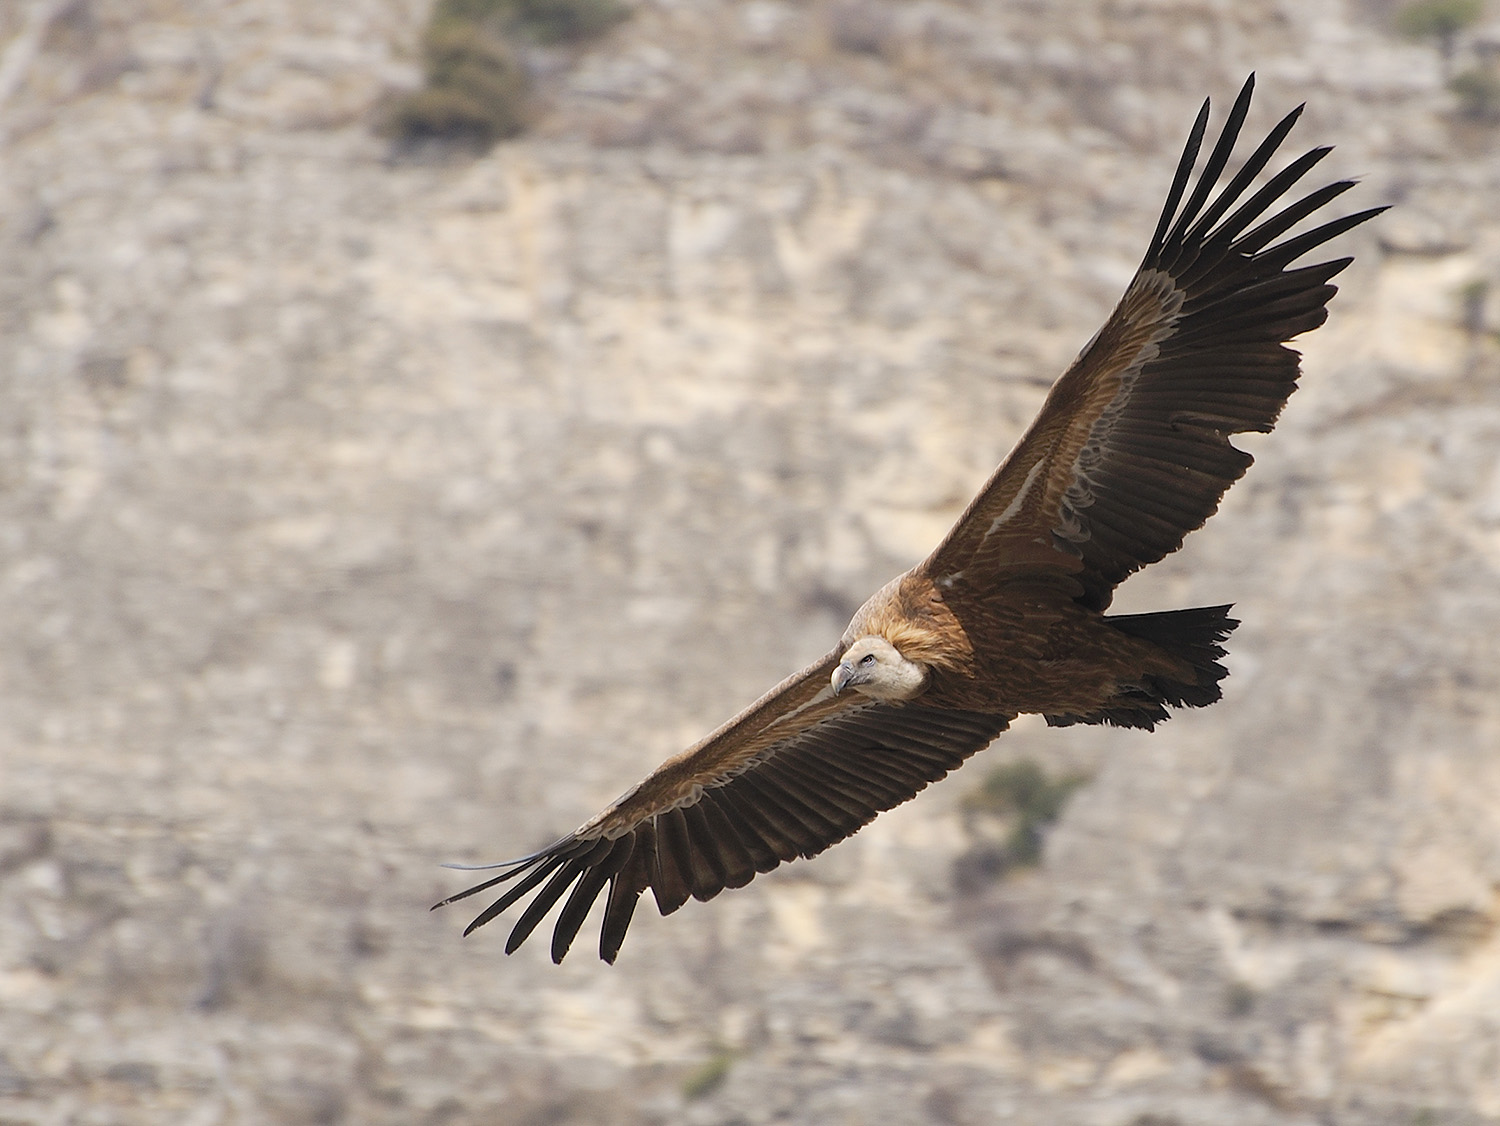 Griffon vulture in flight on the background of the rock